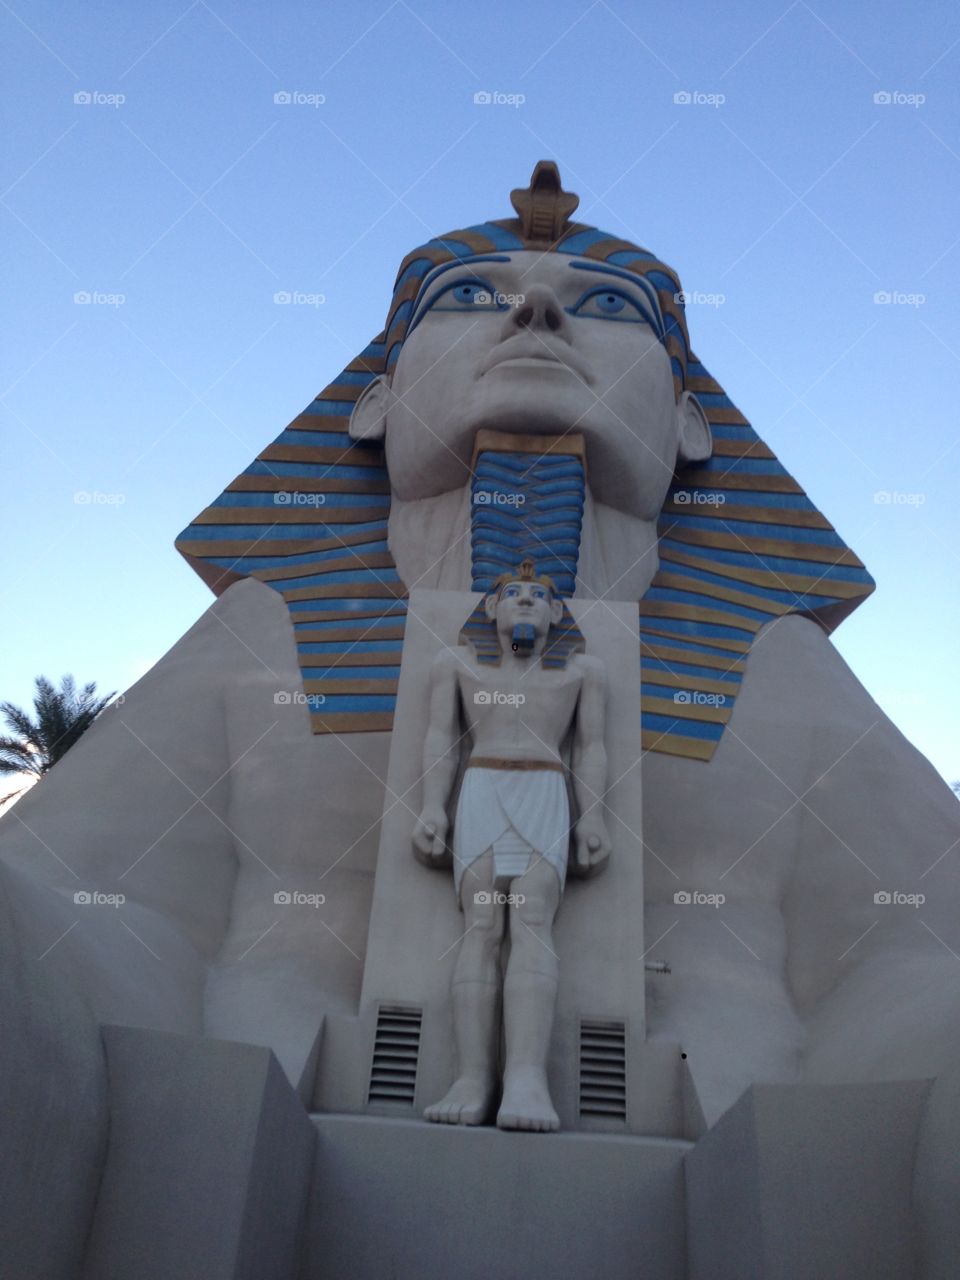 Luxor Hotel. My husband and I were in Las Vegas in 2013 on vacation 